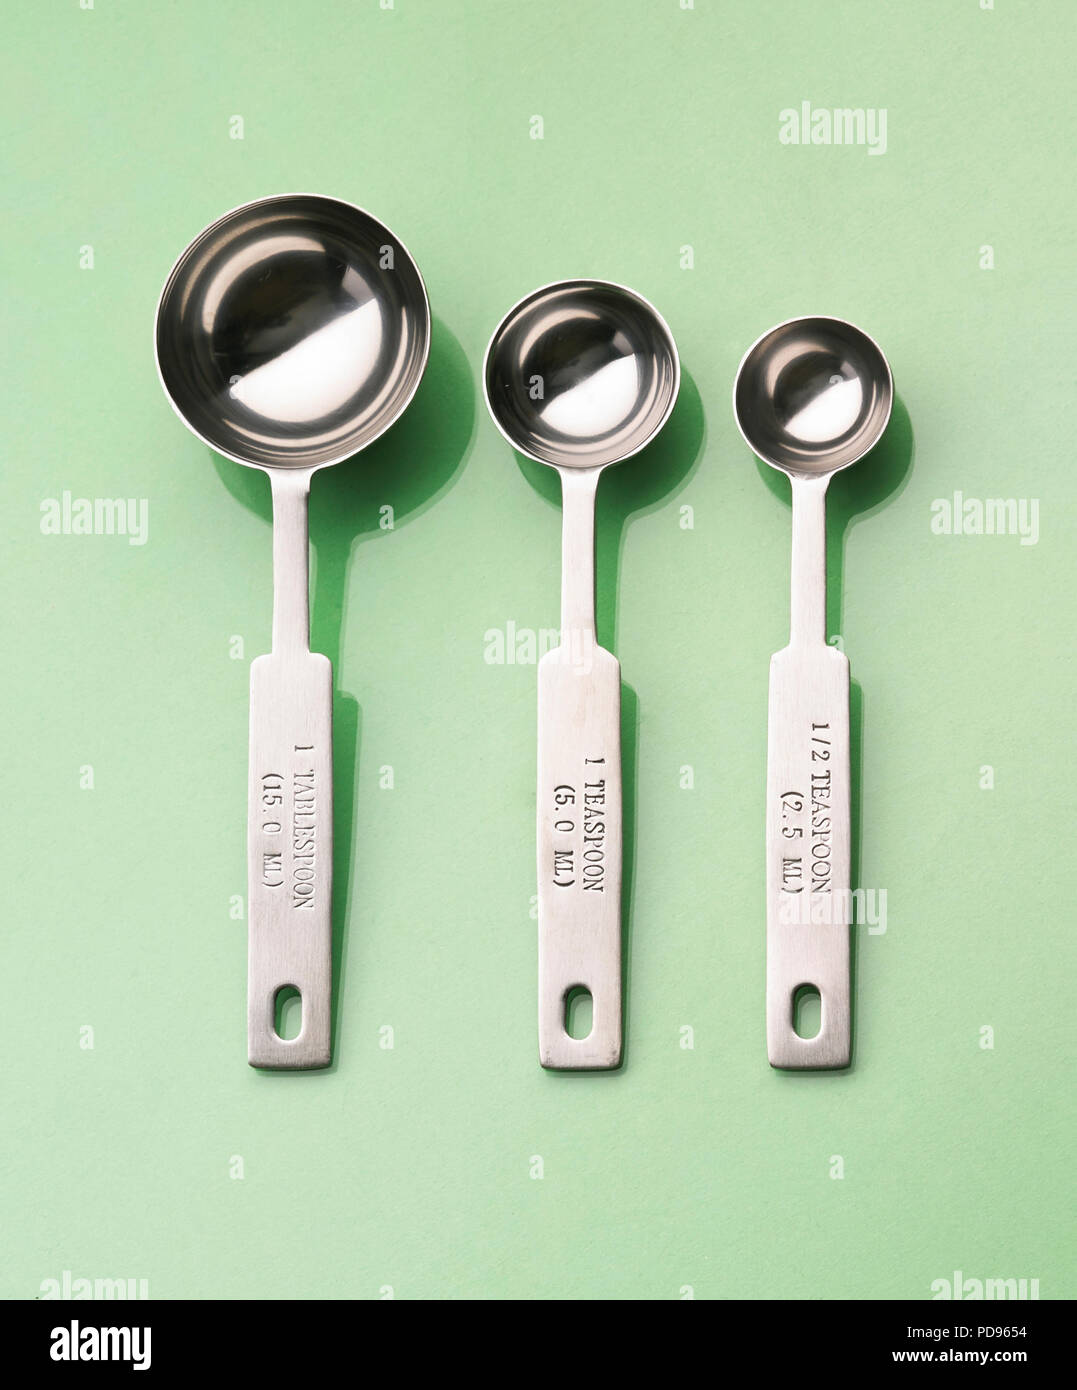 Group of measuring spoons on a pale green background Stock Photo